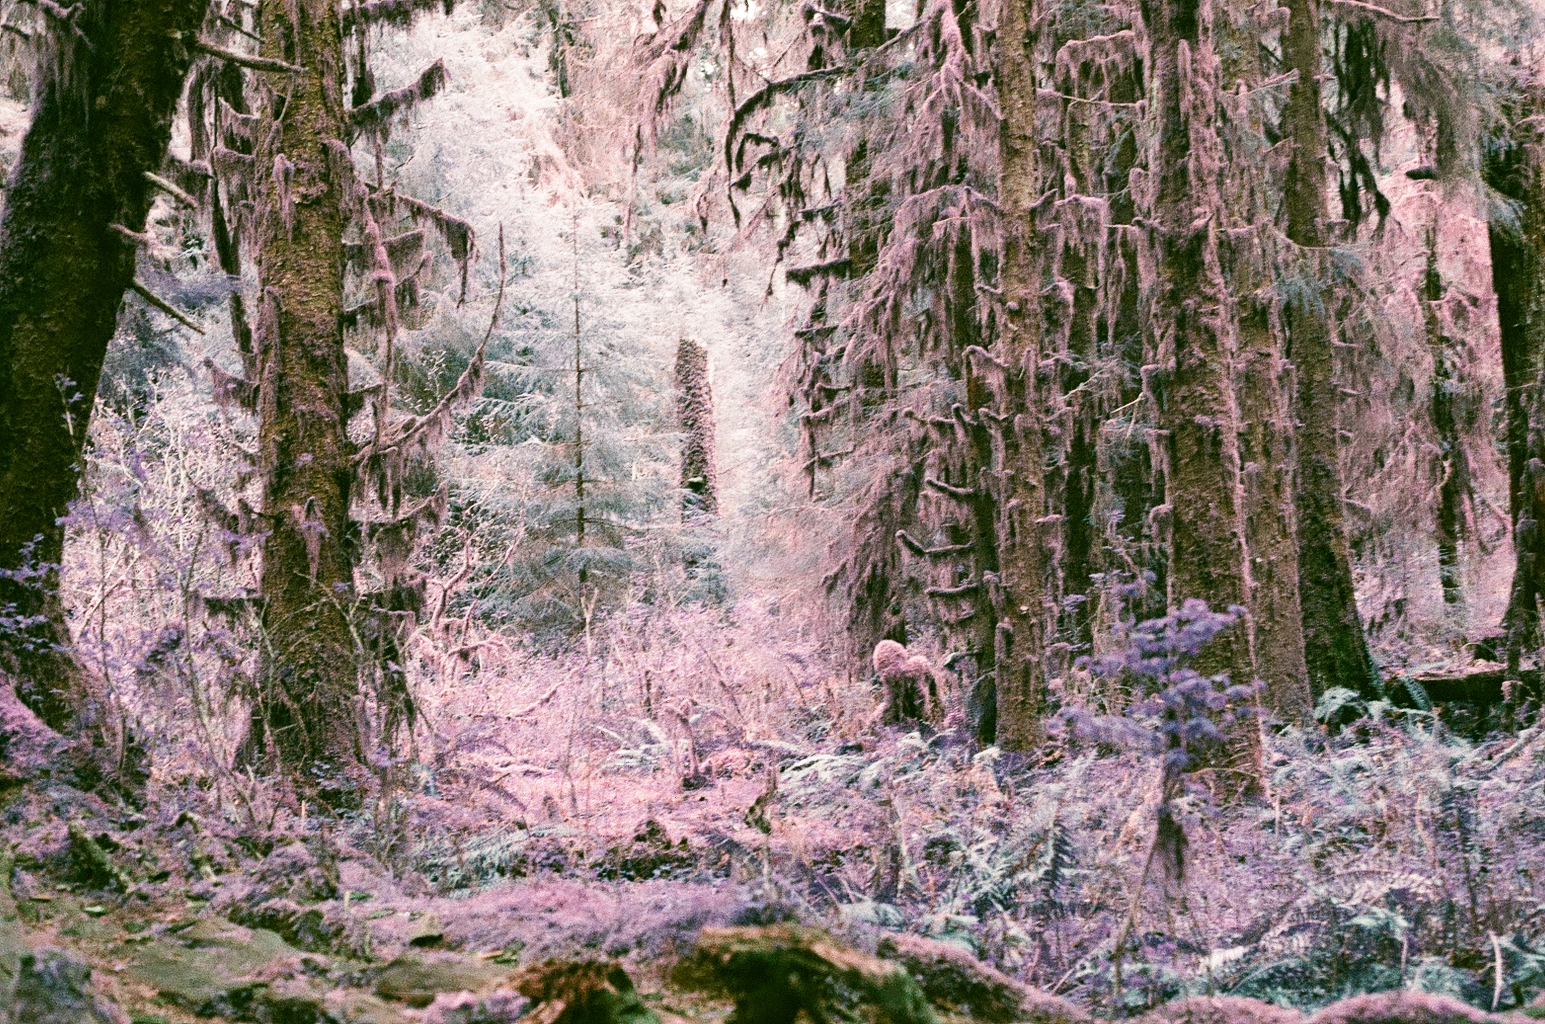 The Olympic Rainforest shot in Lomochrome purple